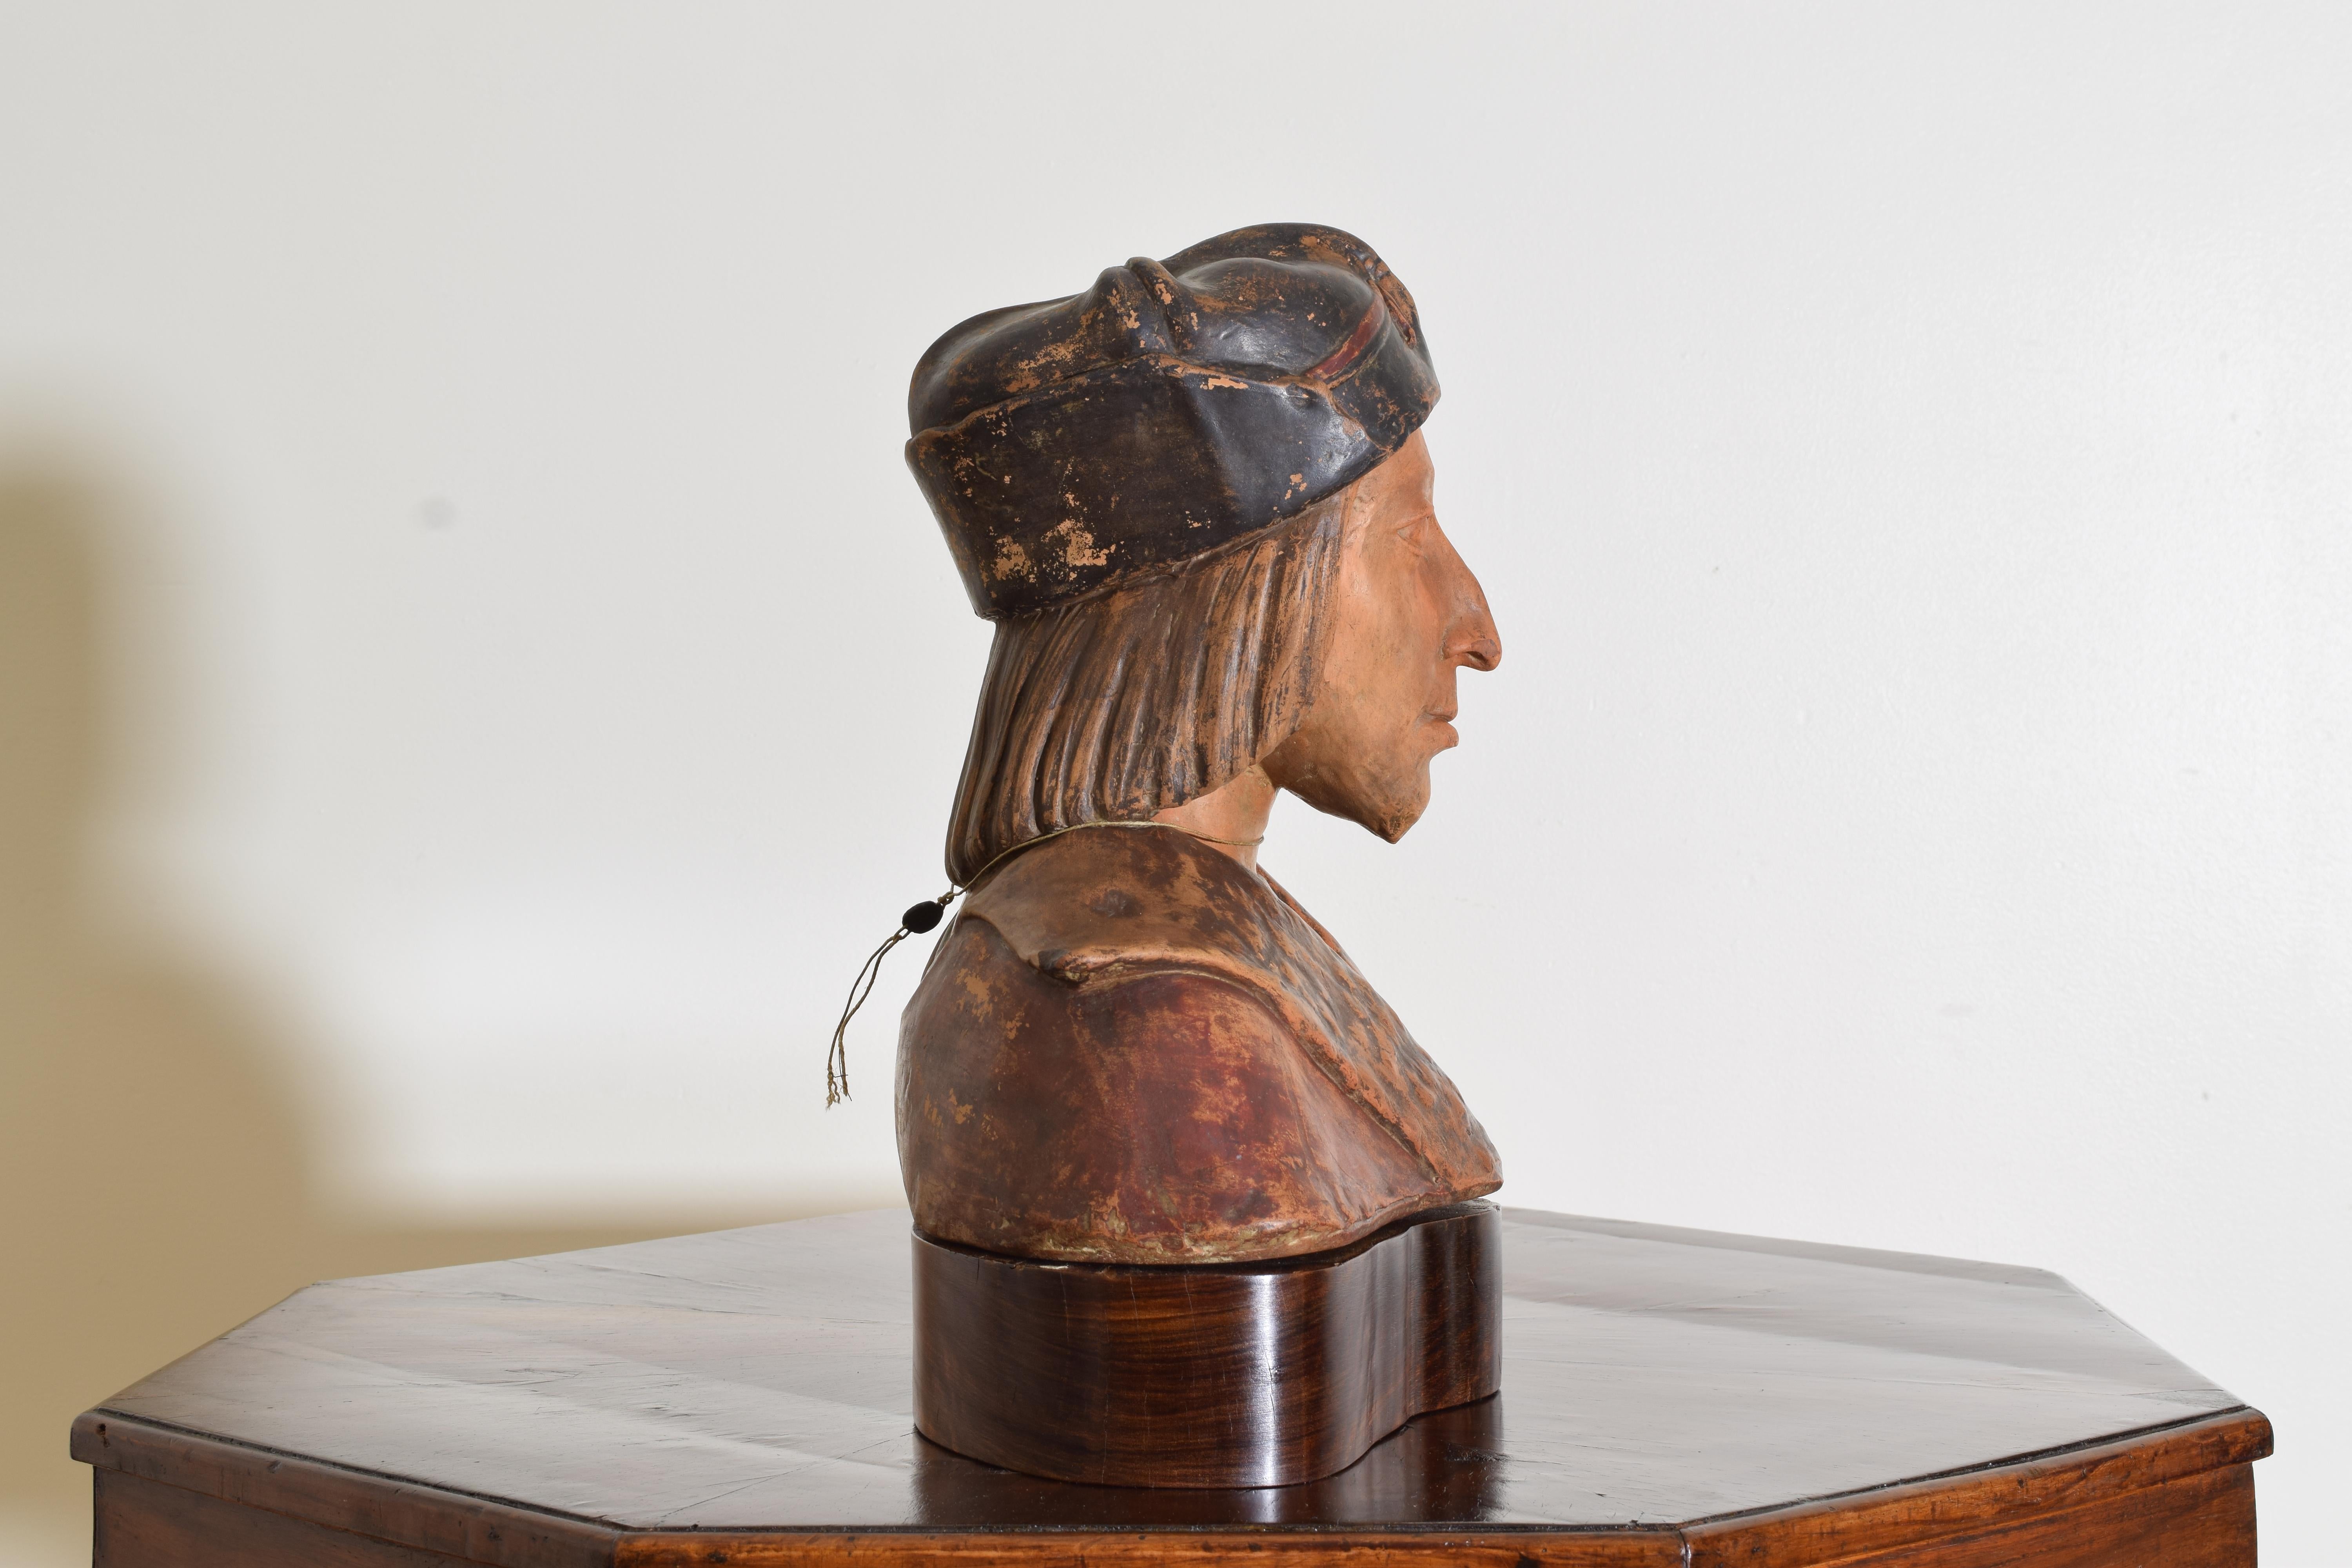 Italian Terra Cotta Bust of Dante Alighieri on Wooden Stand, Early 20th Century For Sale 2